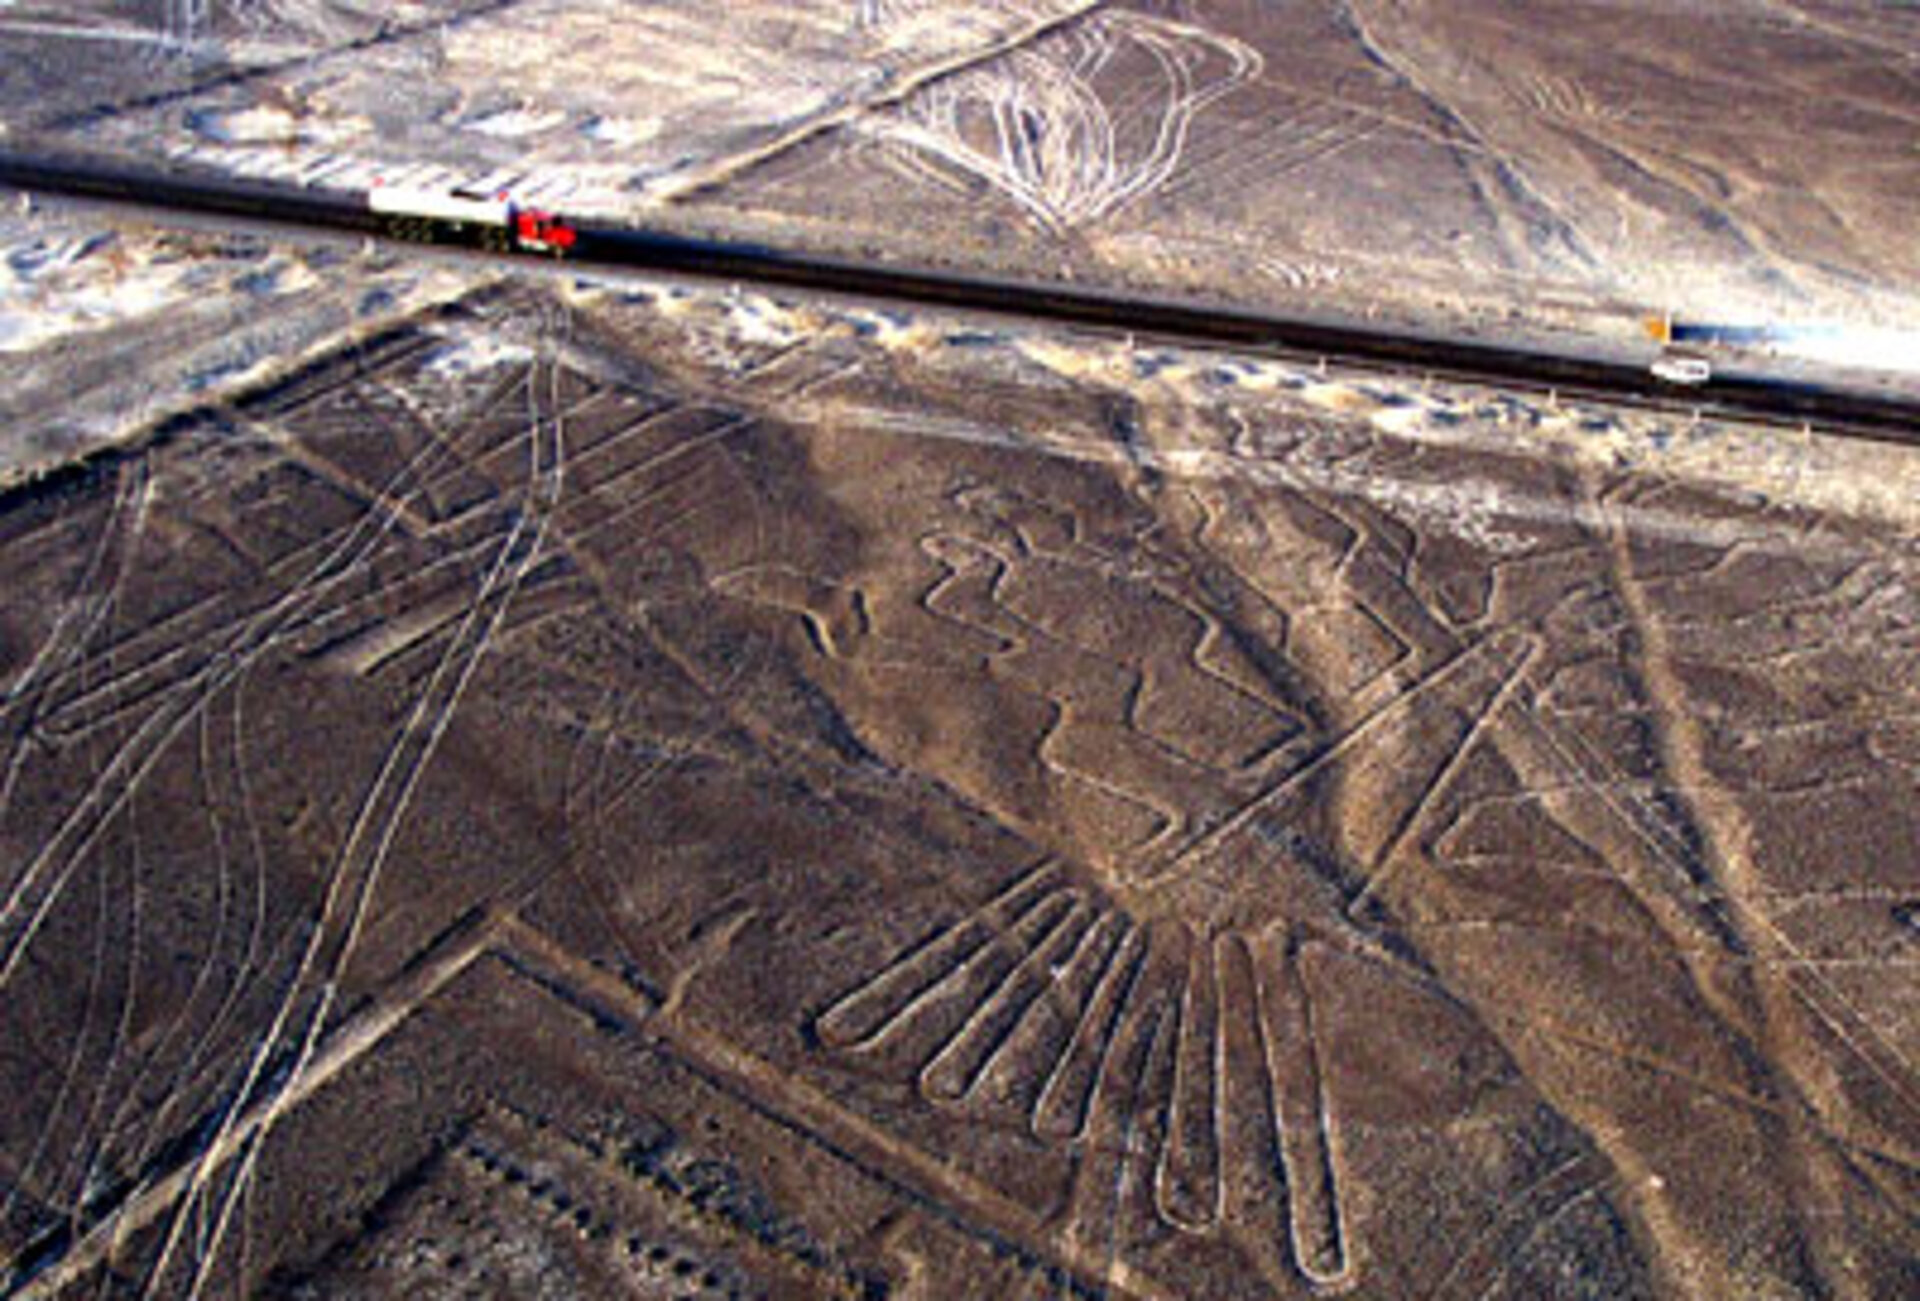 The Pan-American Highway runs through the Nasca Lines